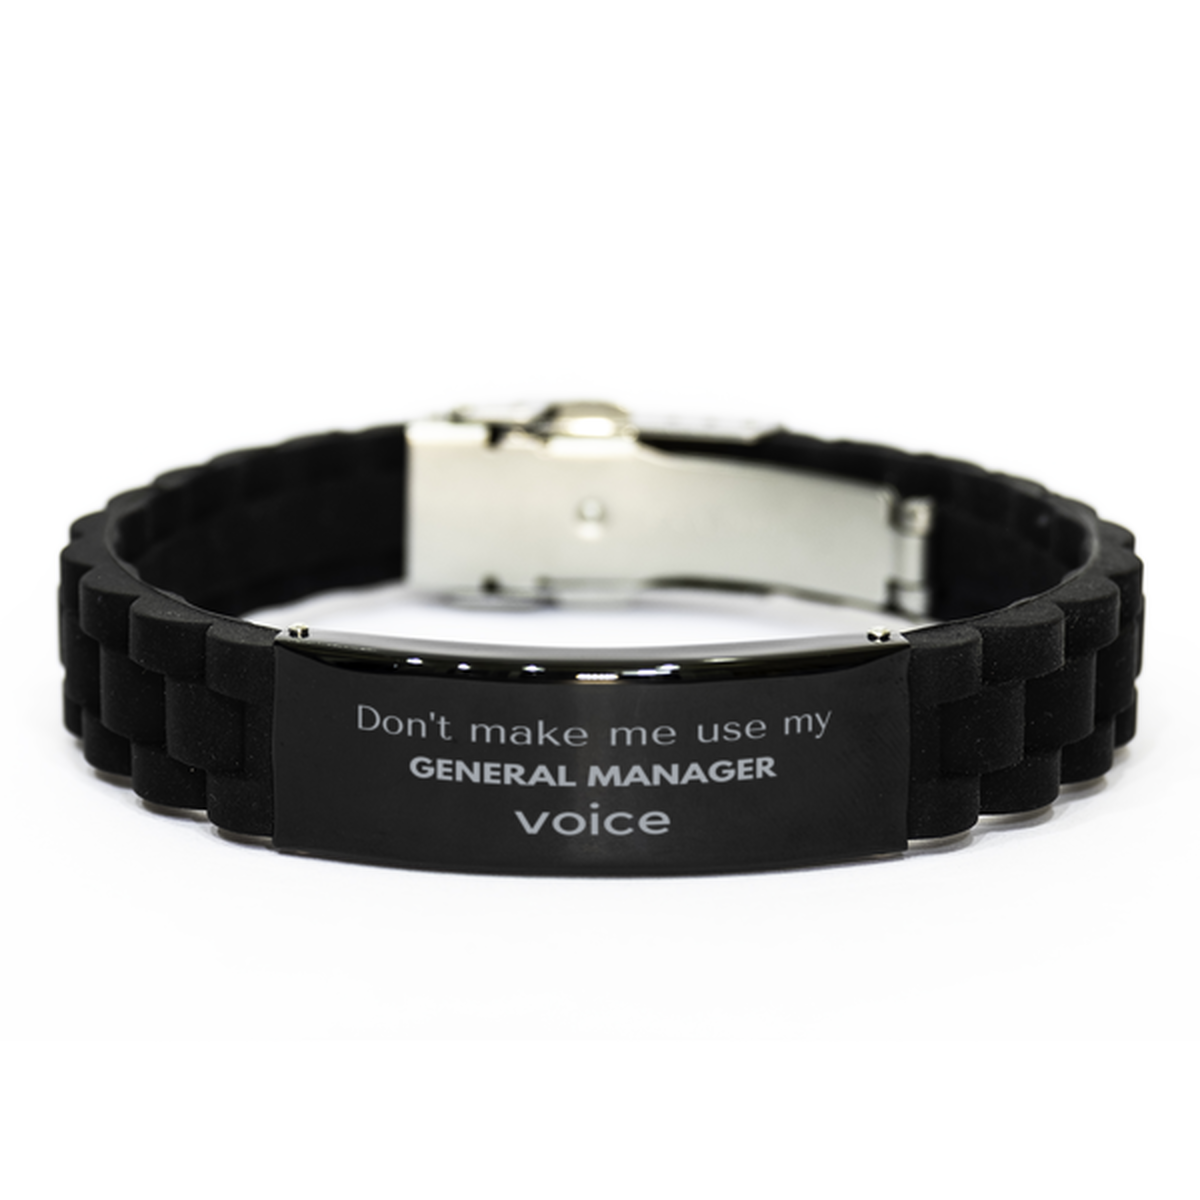 Don't make me use my General Manager voice, Sarcasm General Manager Gifts, Christmas General Manager Black Glidelock Clasp Bracelet Birthday Unique Gifts For General Manager Coworkers, Men, Women, Colleague, Friends